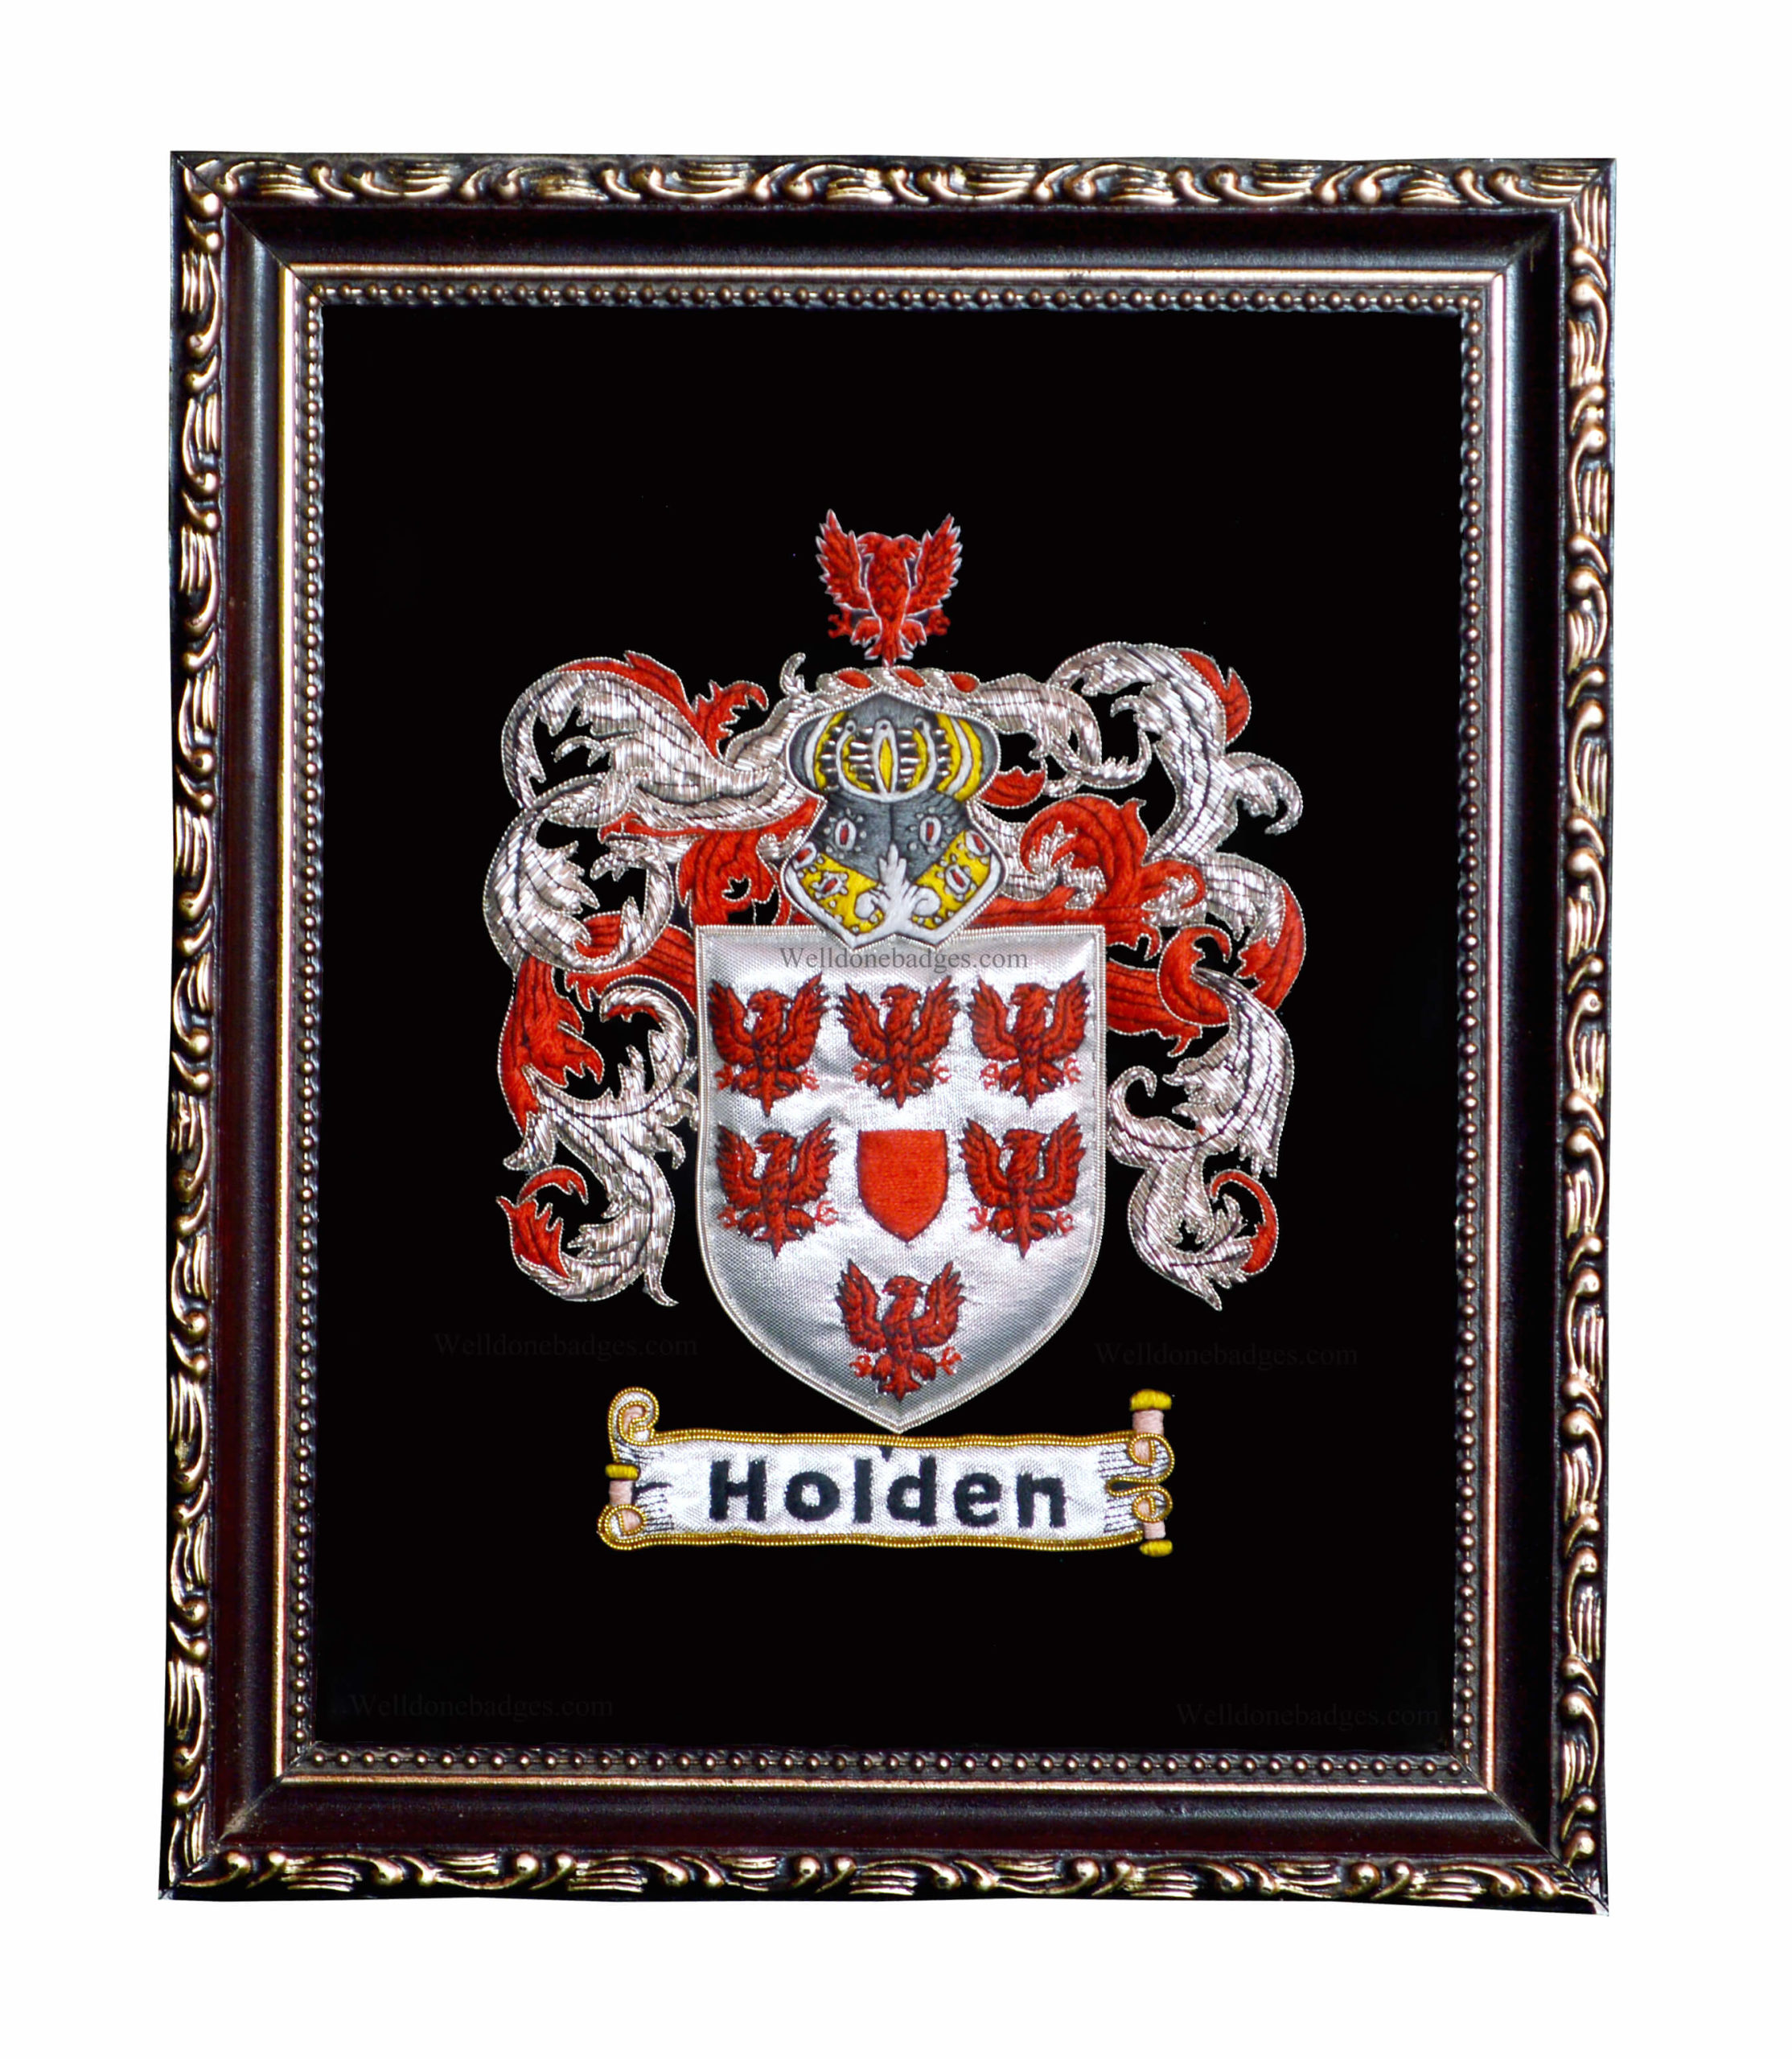 Hand embroidered Beautiful framed Family crest / Coat of arms